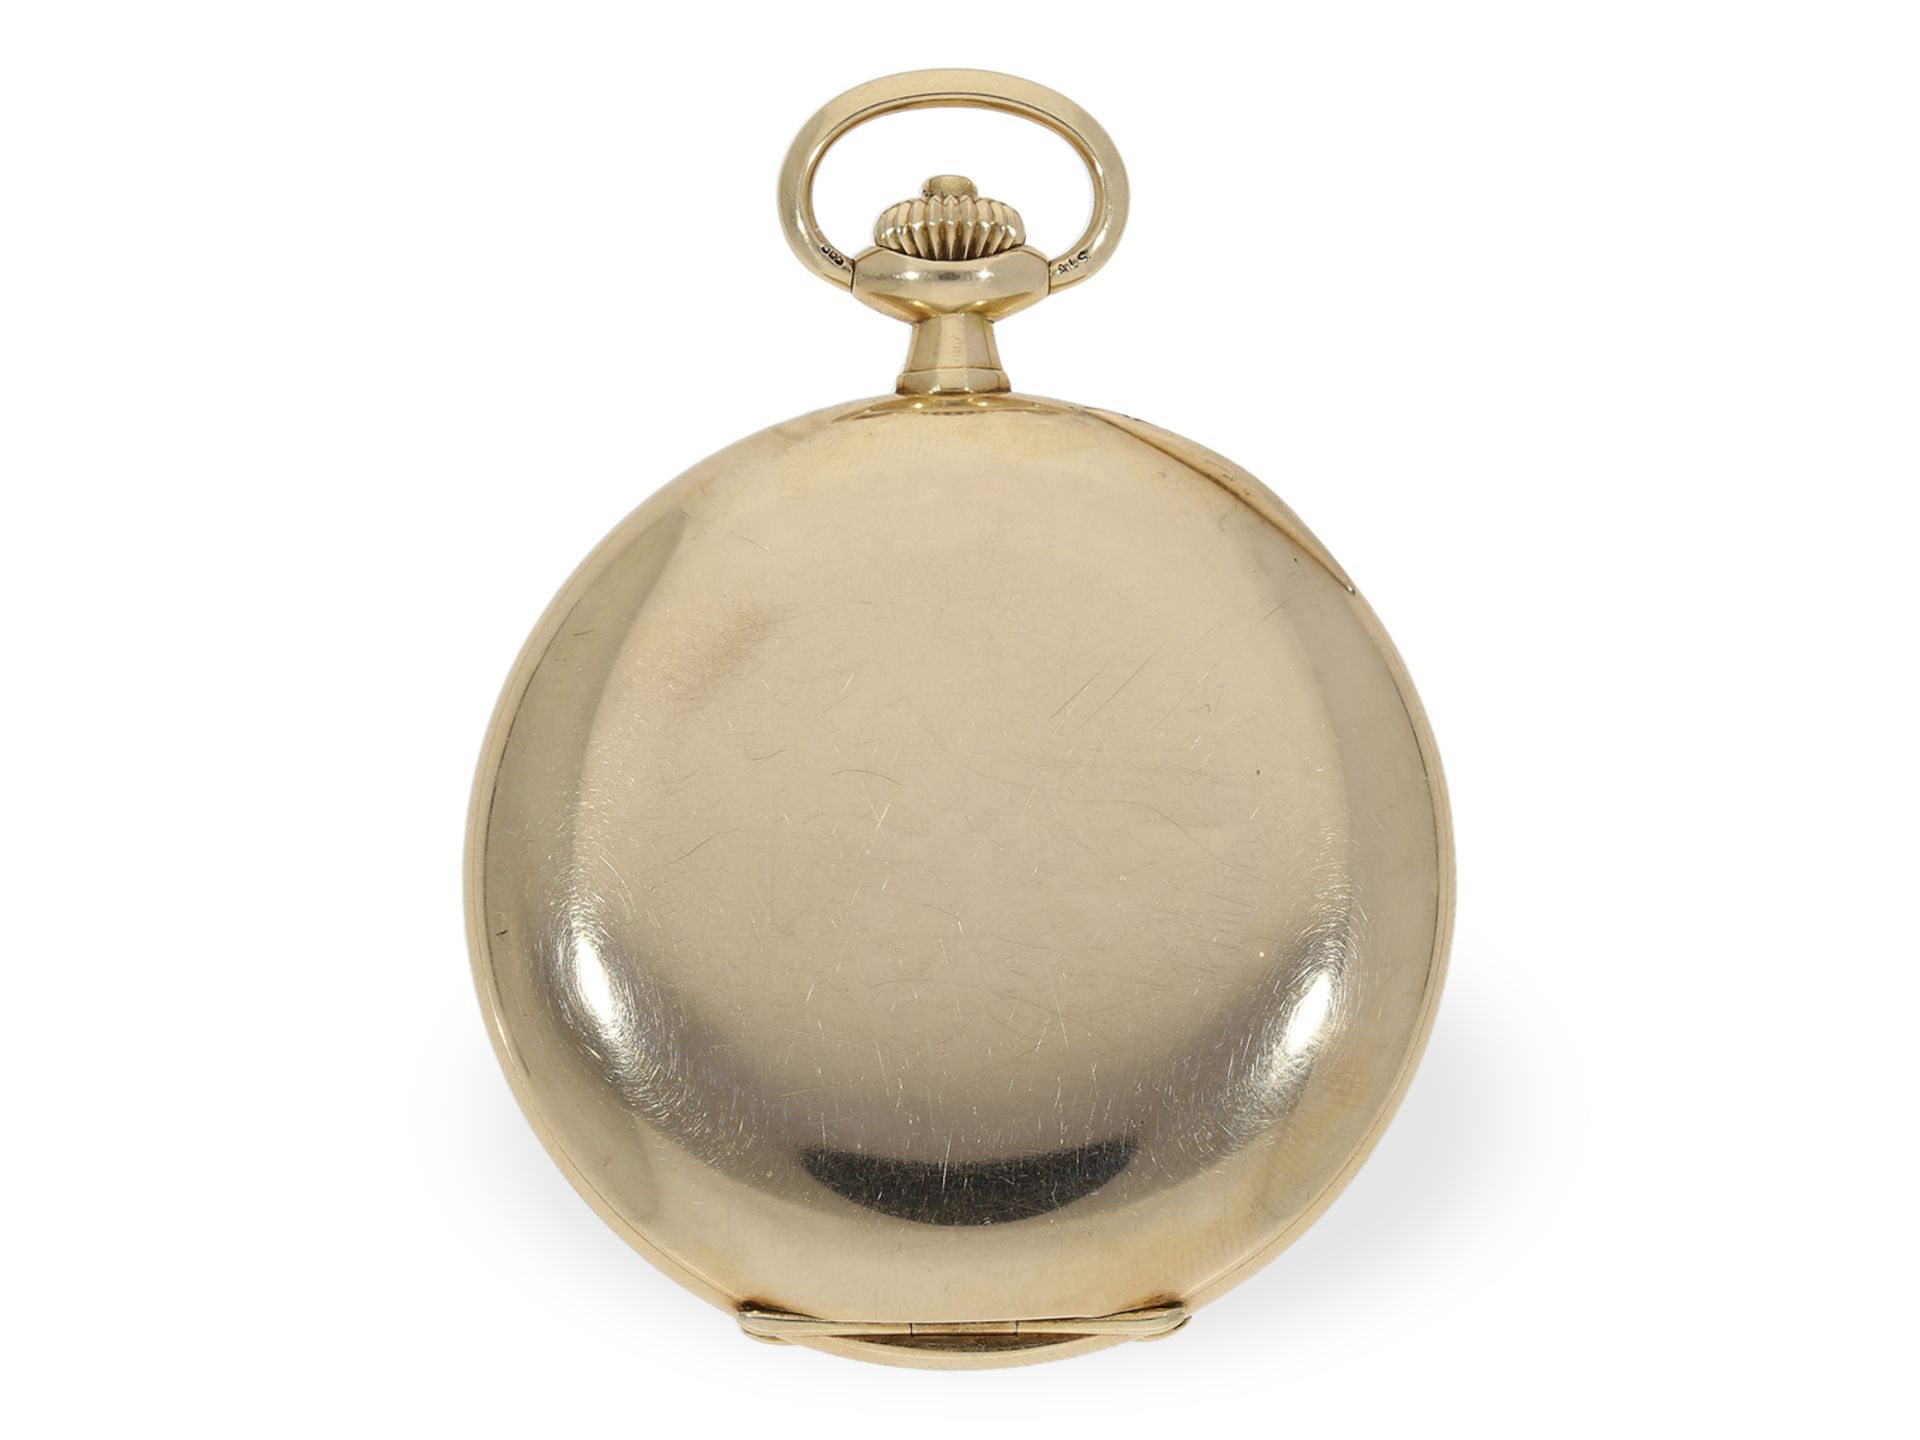 Pocket watch: very well preserved A. Lange & Söhne gold hunting case watch from 1926, collector's wa - Image 7 of 7